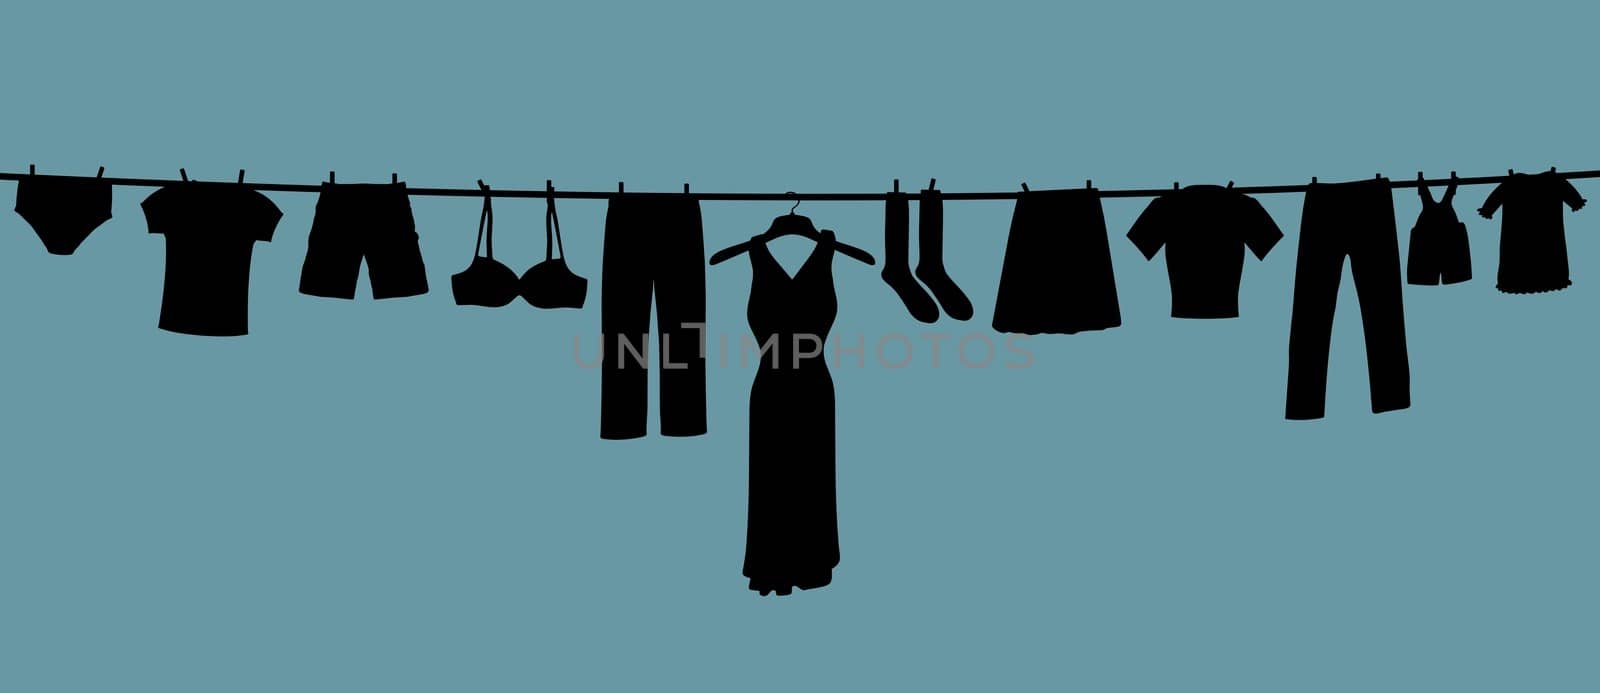 Illustration of a long clothes line containing many clothes types